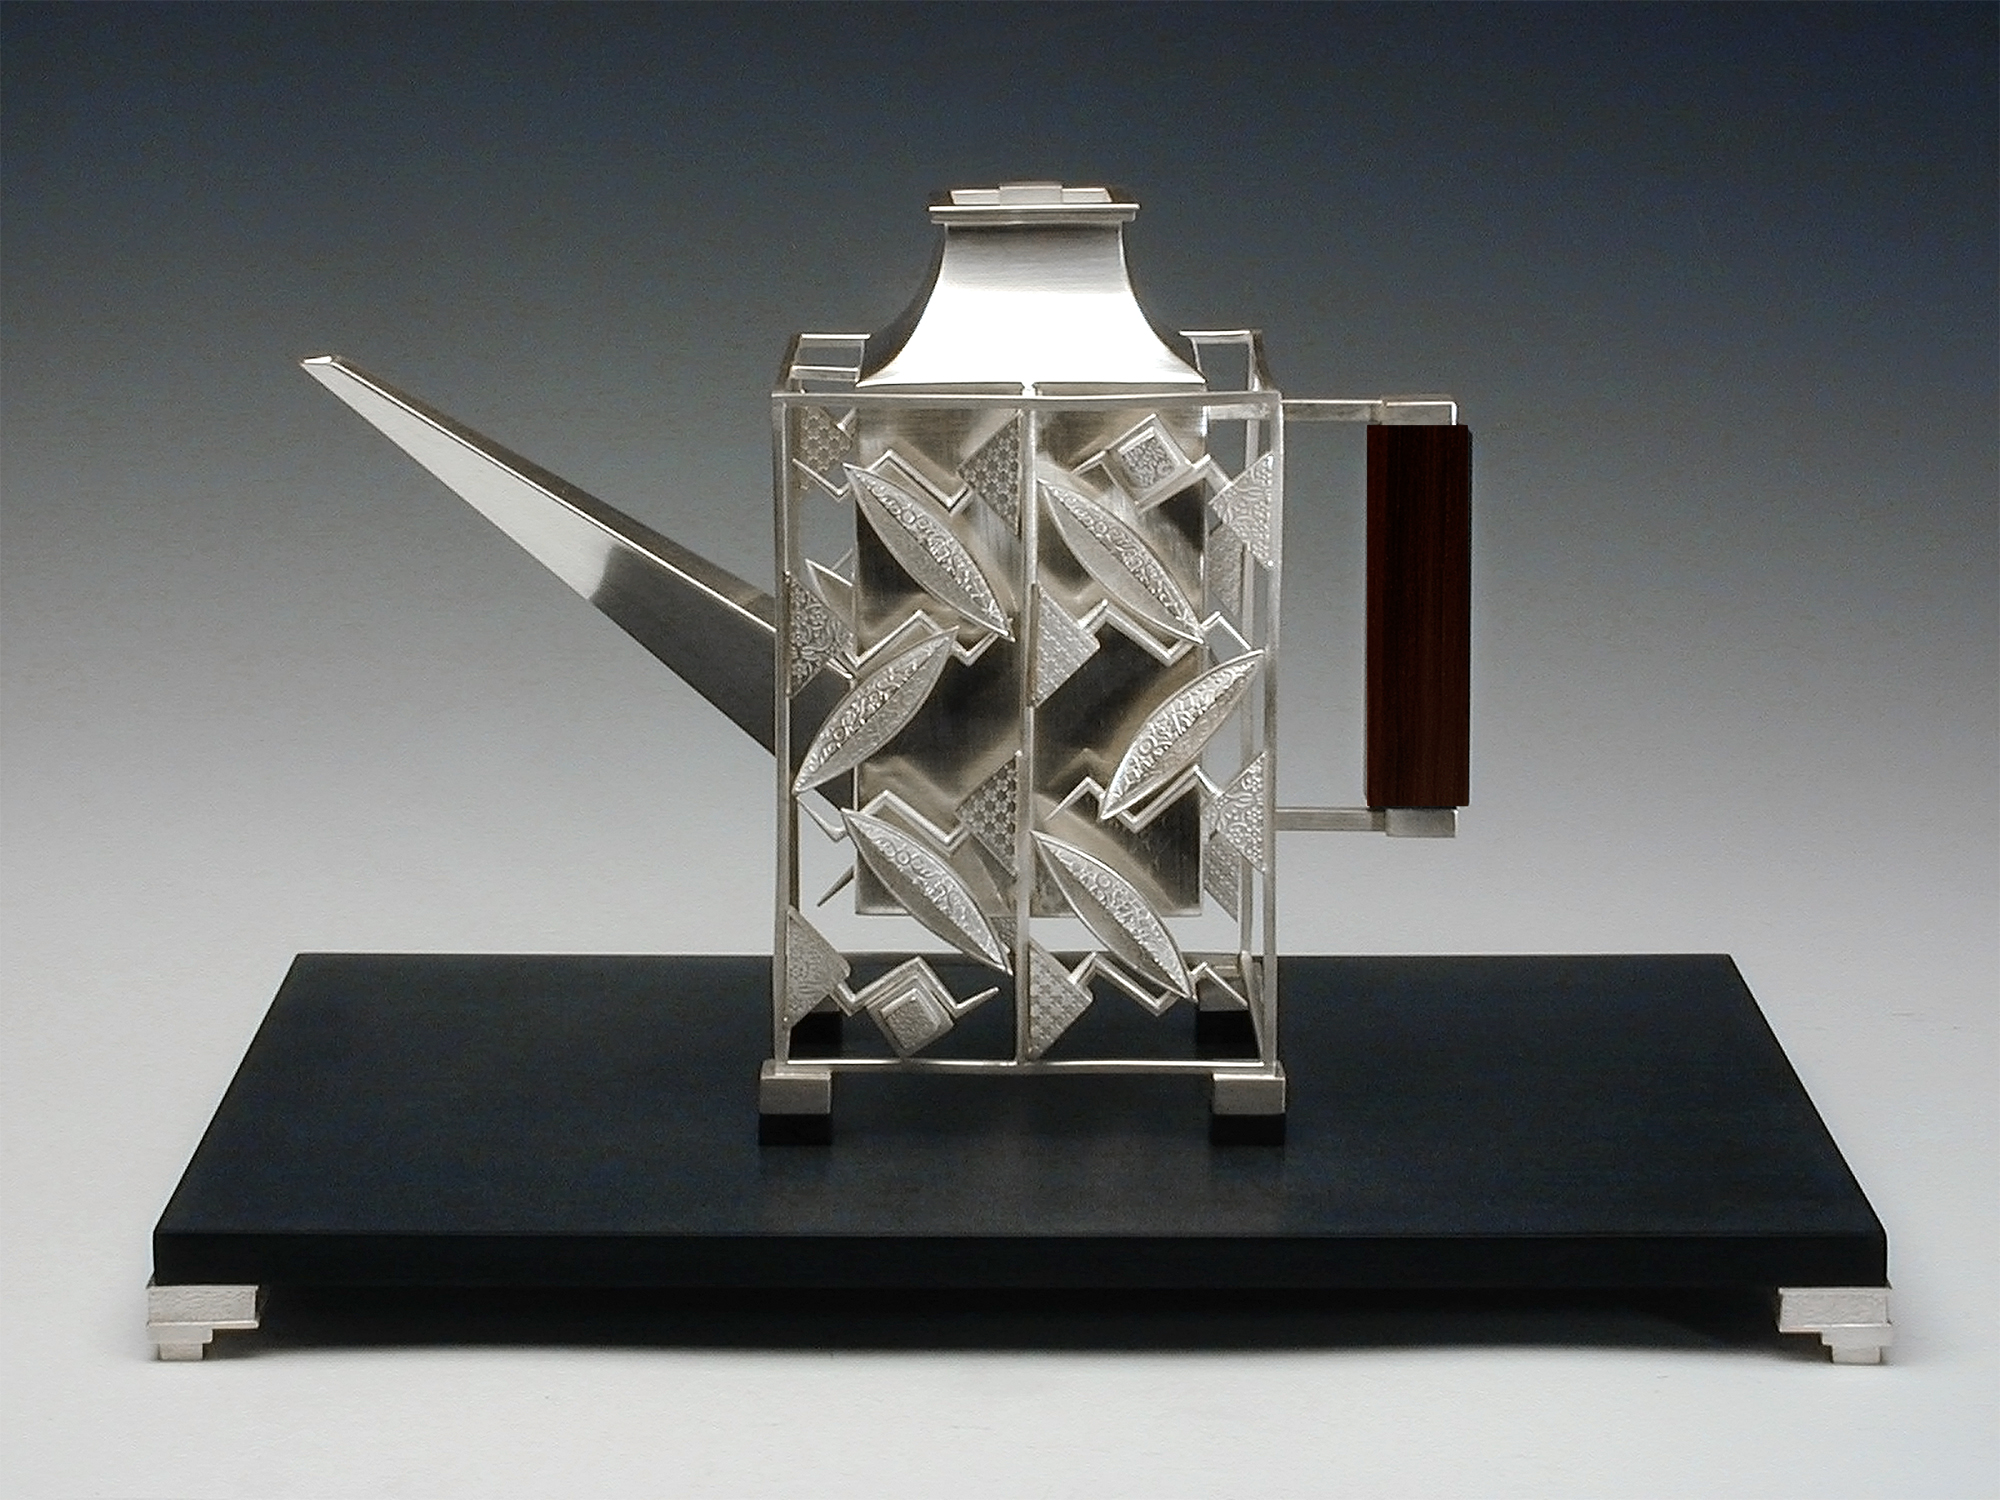 Square Teapot  |  2001  |  sterling silver, micarta  |   12 x 12 x 8.5 inches